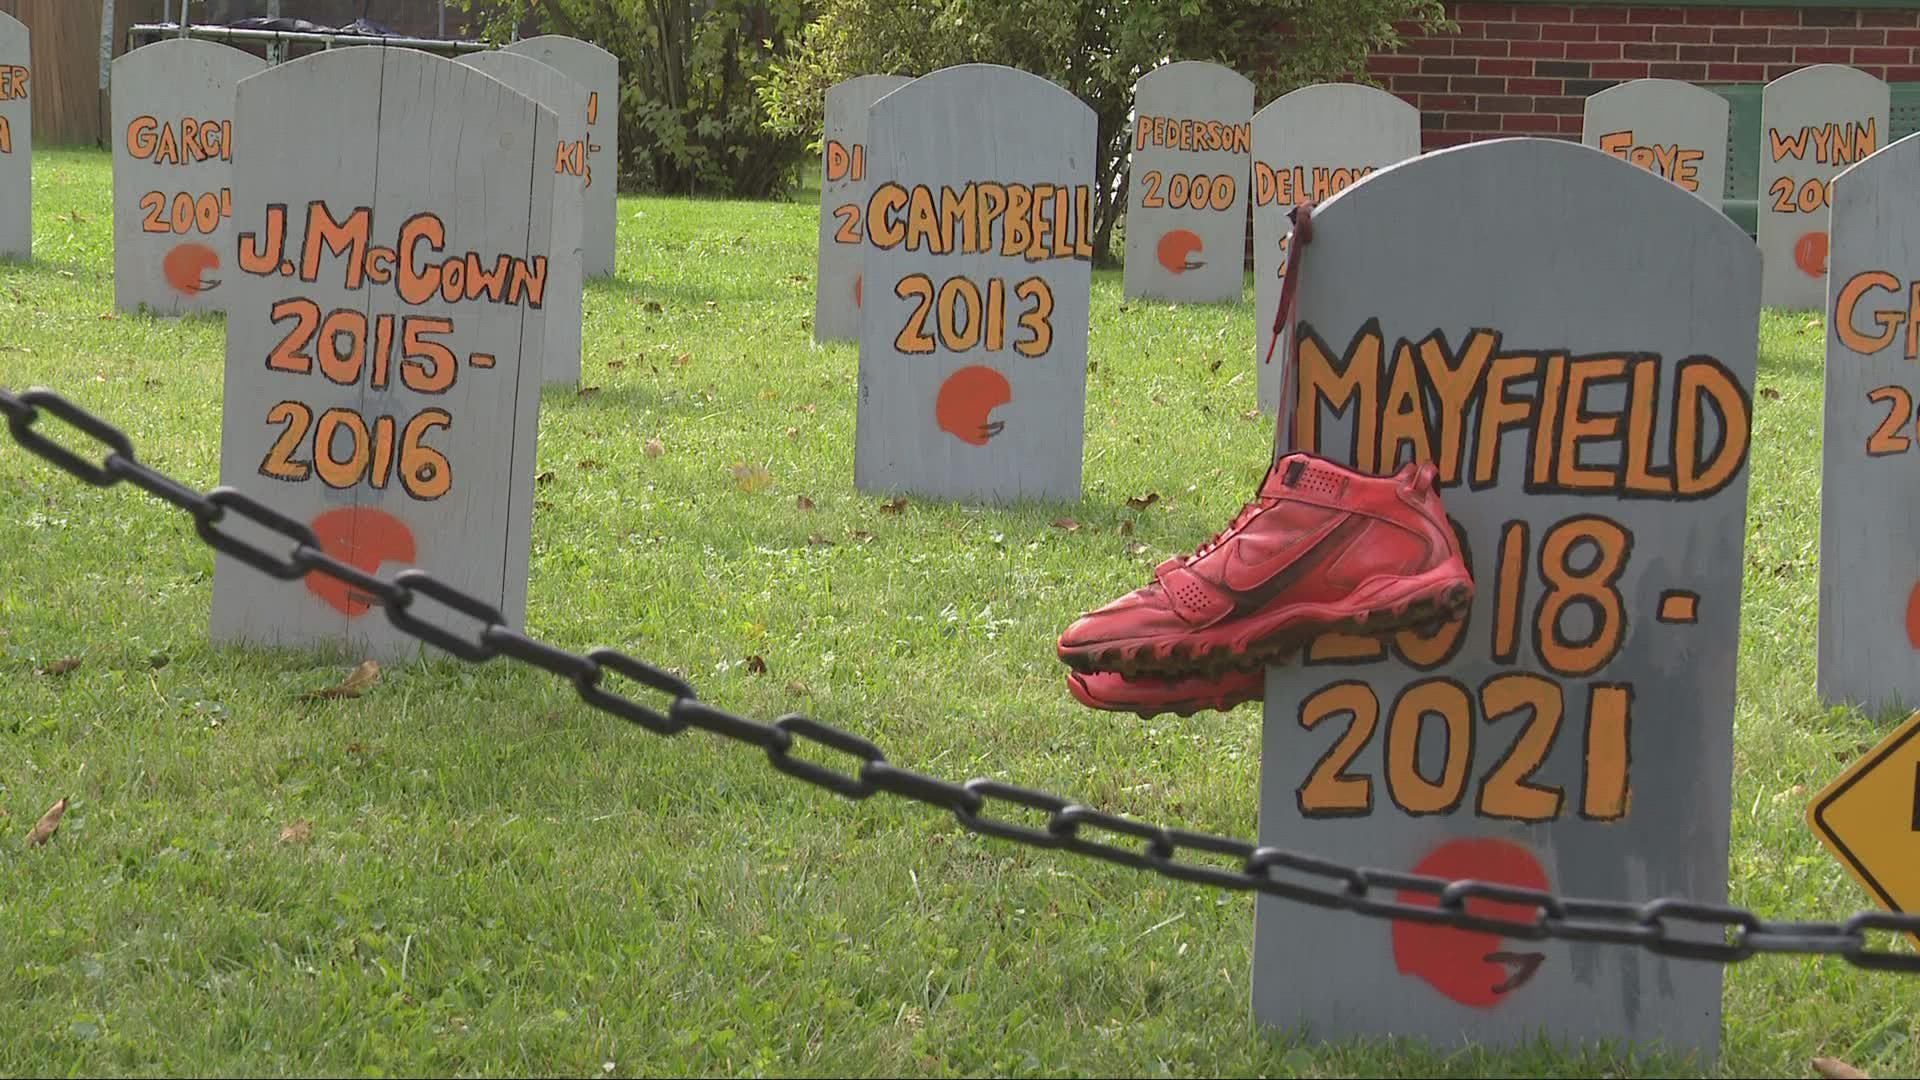 Each tombstone is marked with a quarterback's name and the years they played for the team written in bright orange colors.